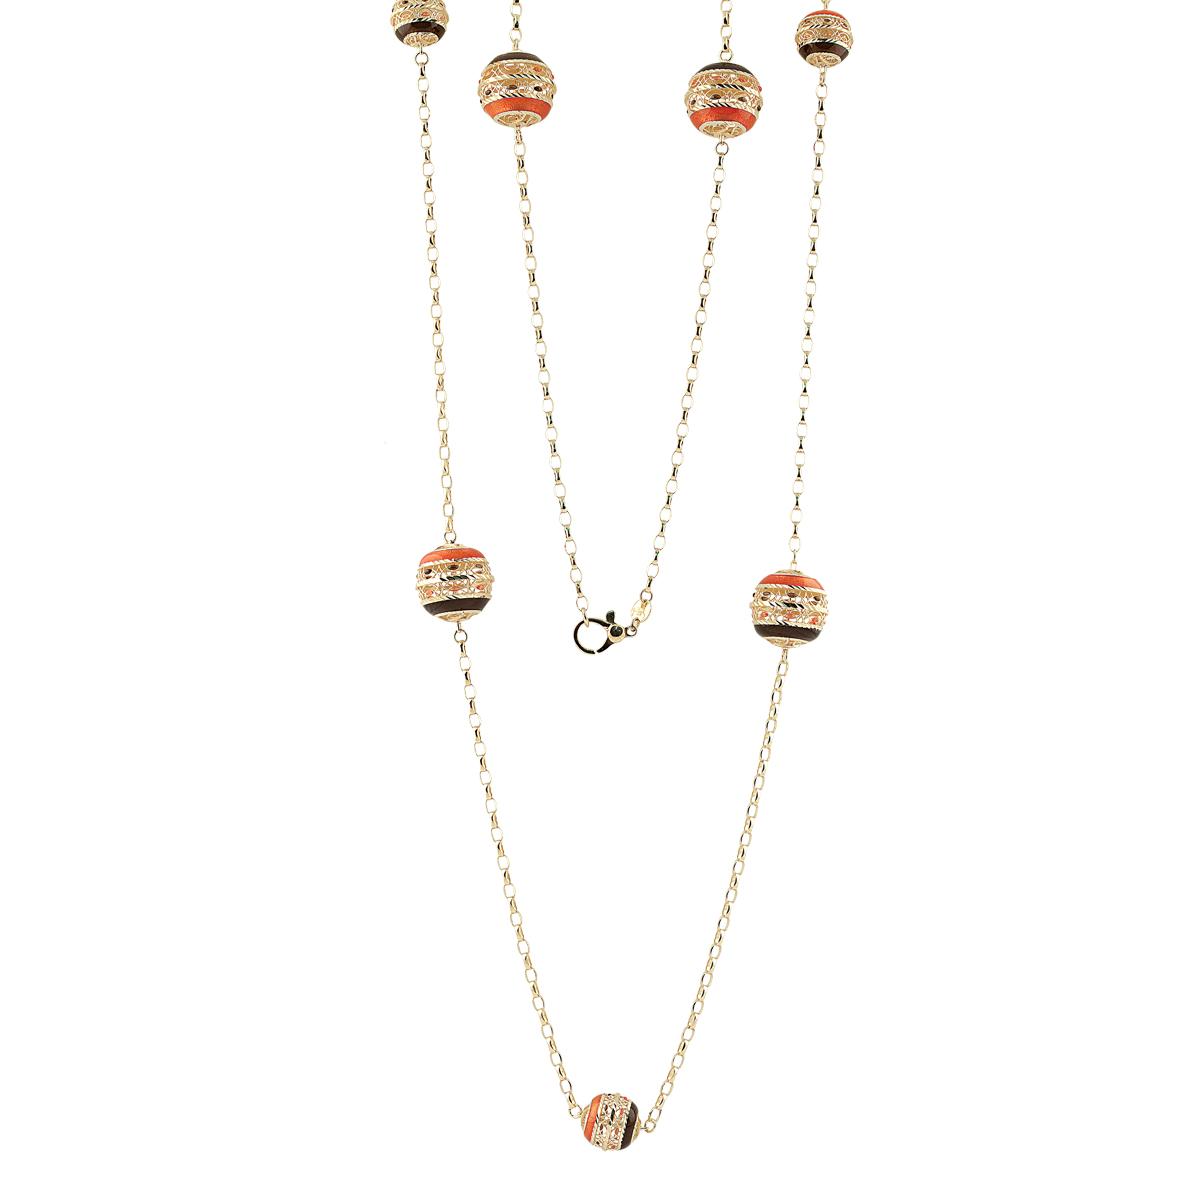 Chanel necklace in 925 silver gilded and enamelled - ZCL1044-MG